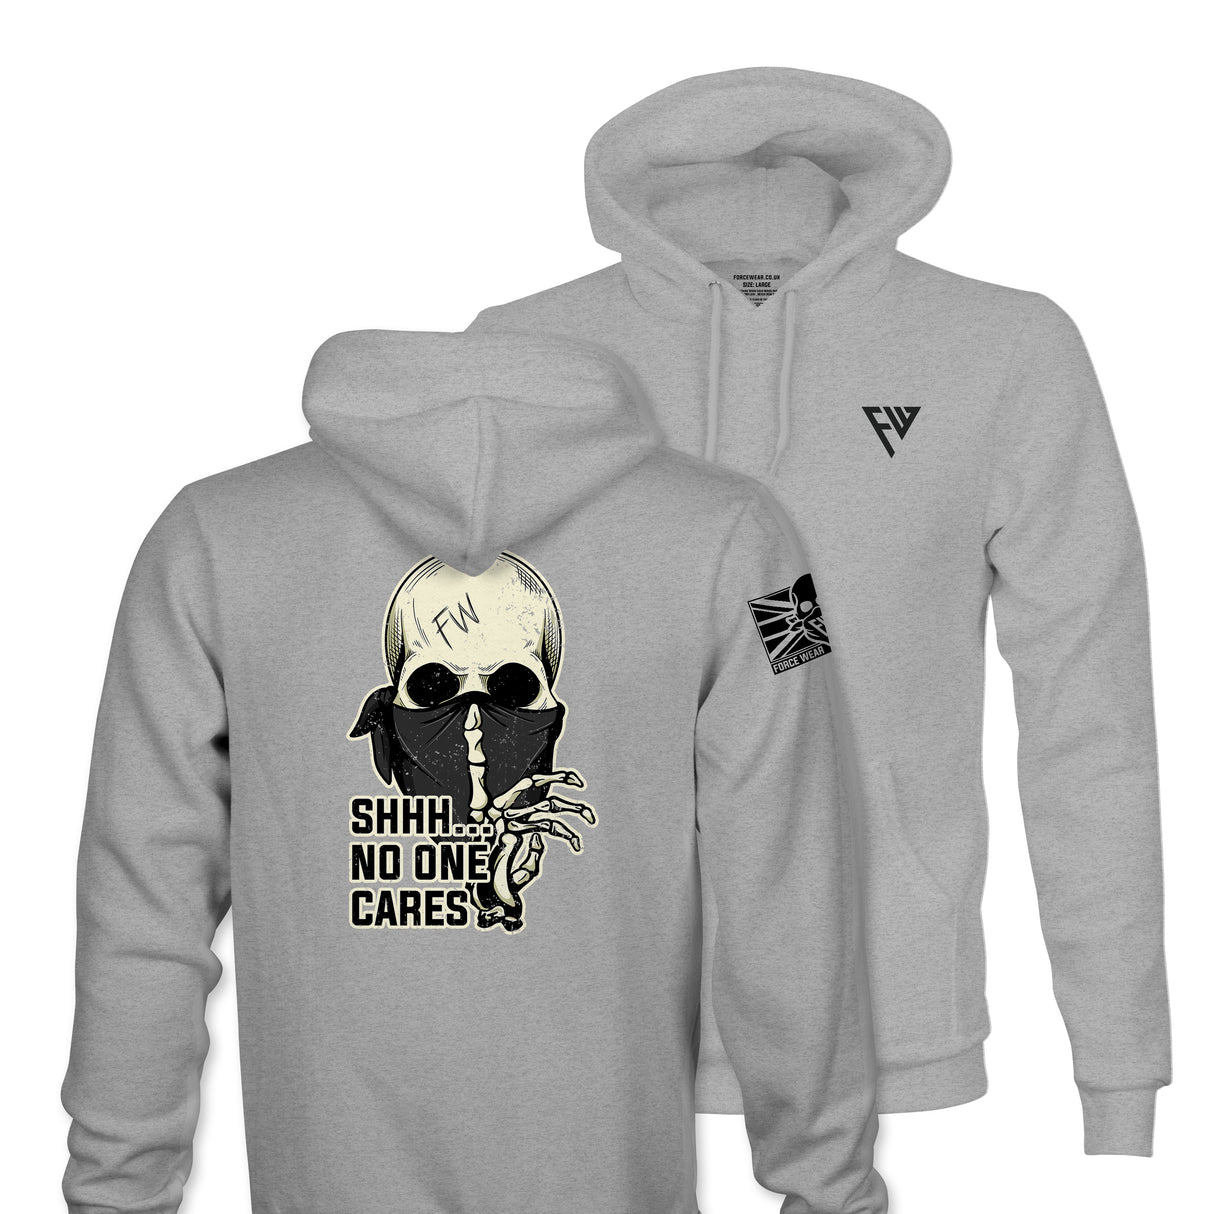 NO ONE CARES TAG & BACK HOODIE